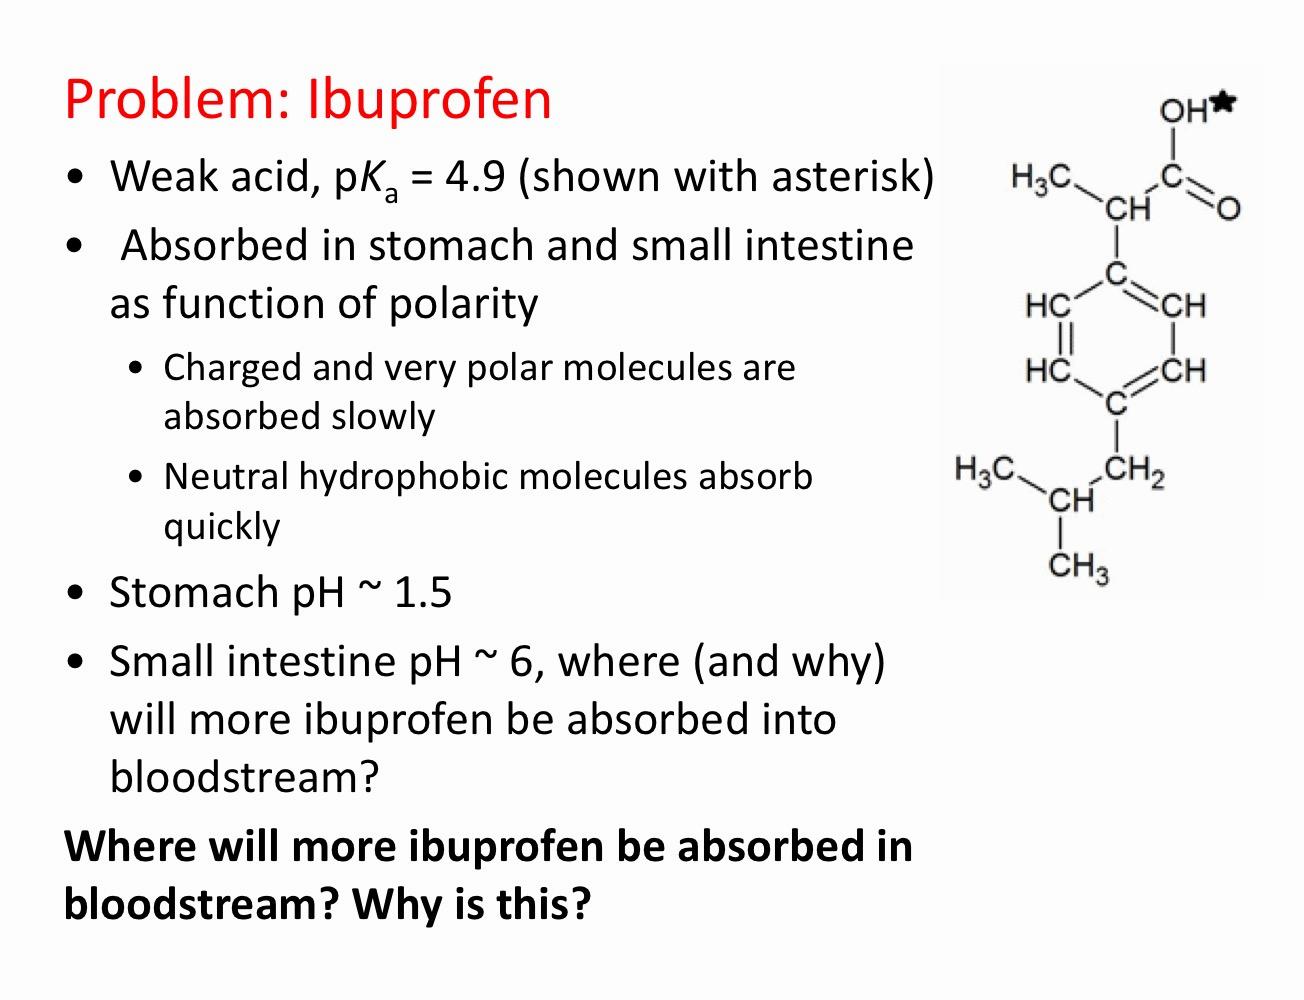 Ibuprofen is a weak acid with a pKa of 4.9 and is absorbed in the stomach and small intestine as a function of polarity.